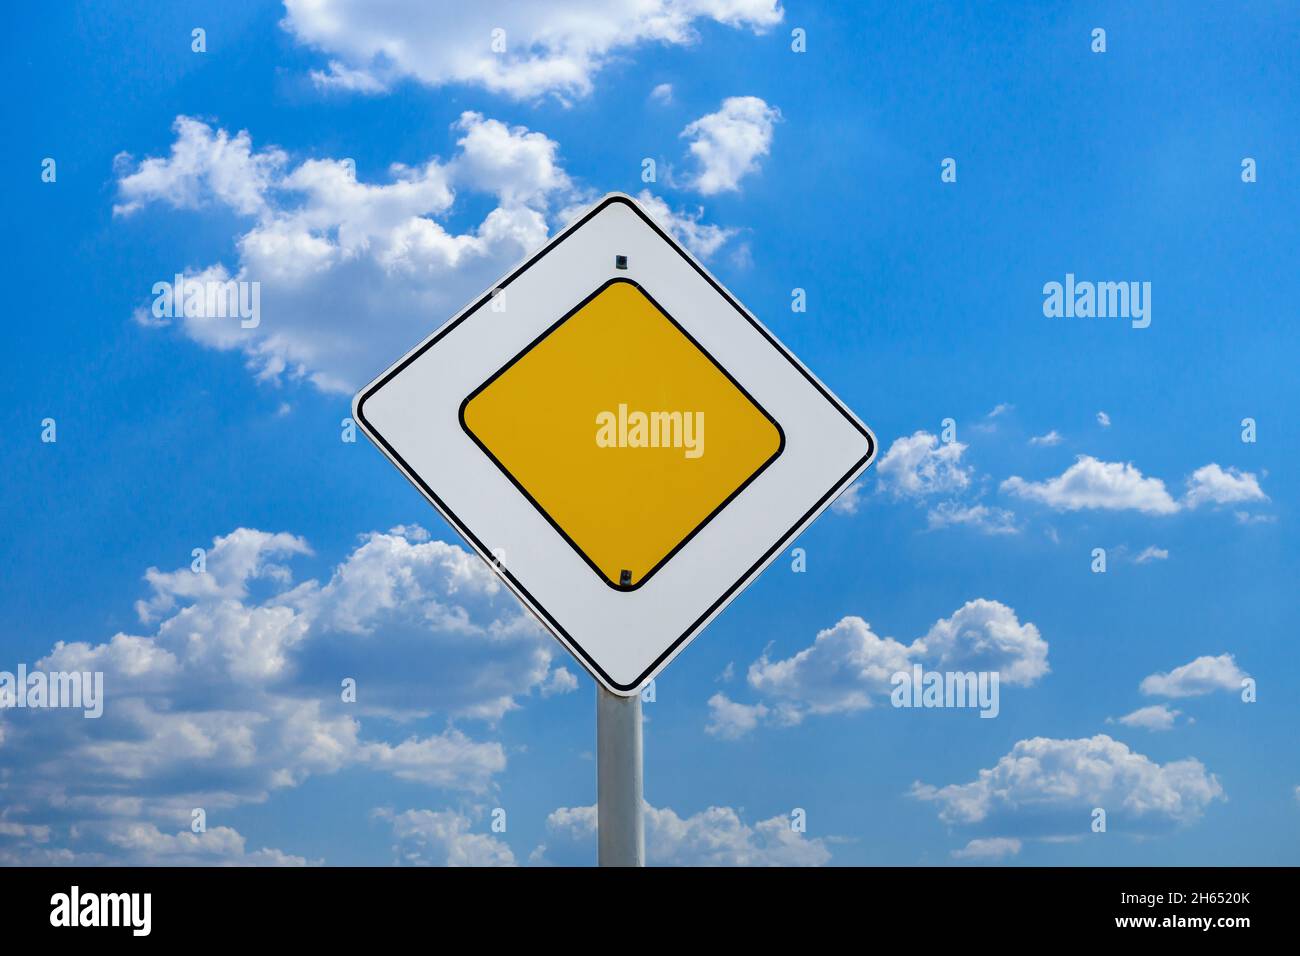 International road sign 'Main road' or 'Priority road' against a blue and slightly cloudy sky Stock Photo